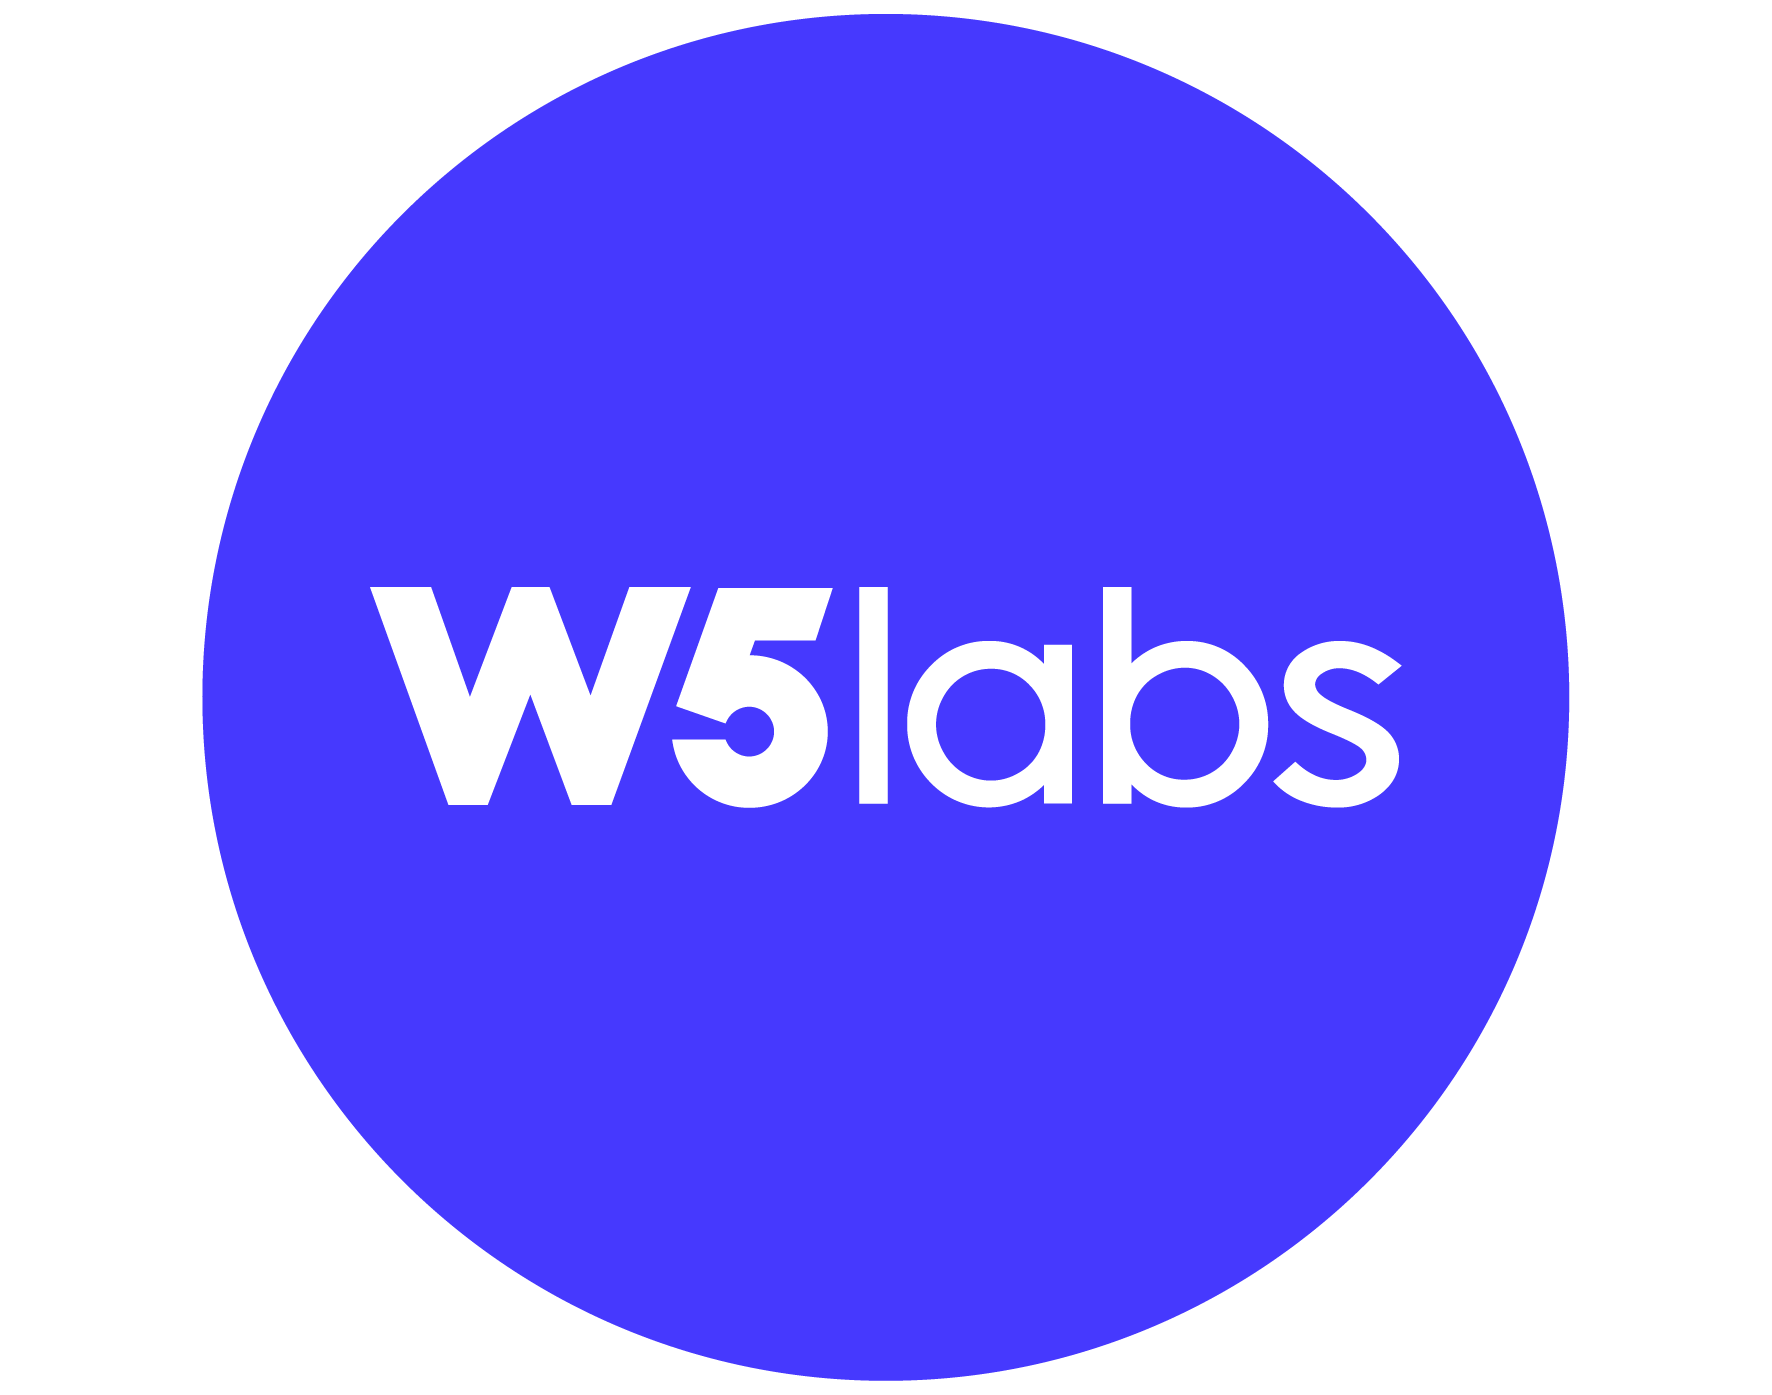 W5labs profile on Qualified.One